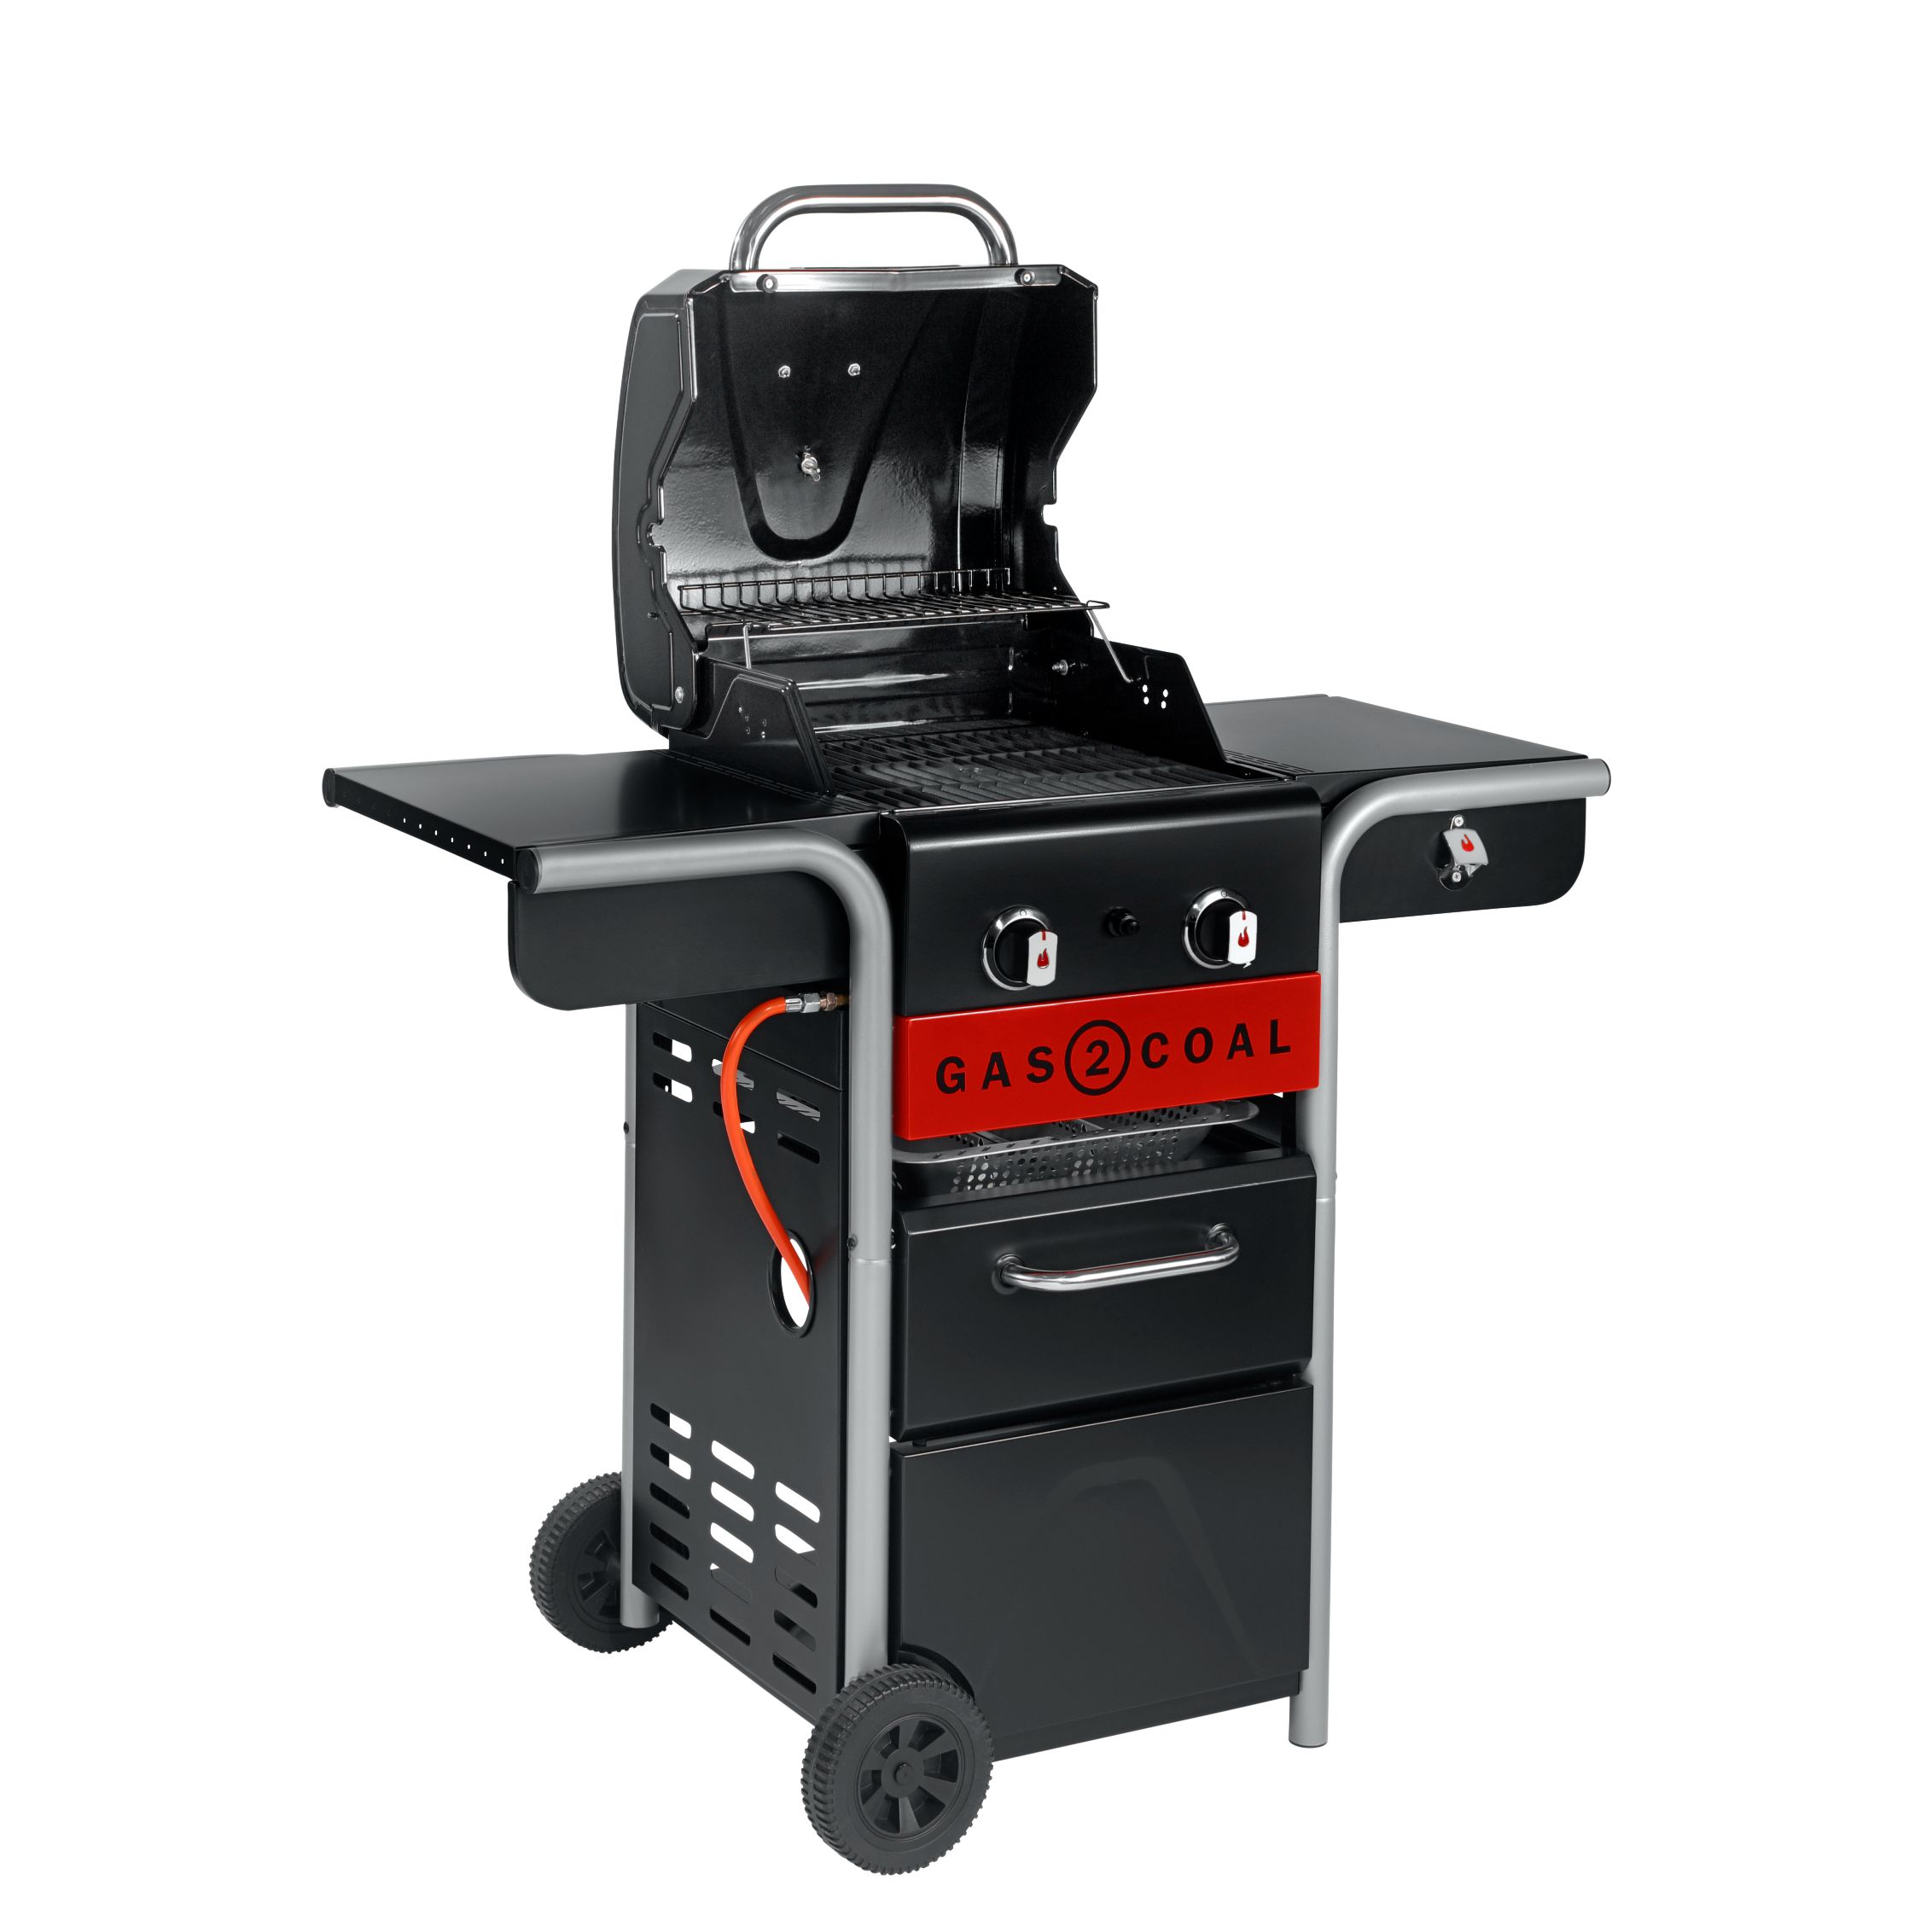 Char-Broil Gas2Coal 210 Hybrid Grill 2 Burner Gas & Coal Barbecue Grill (Black)